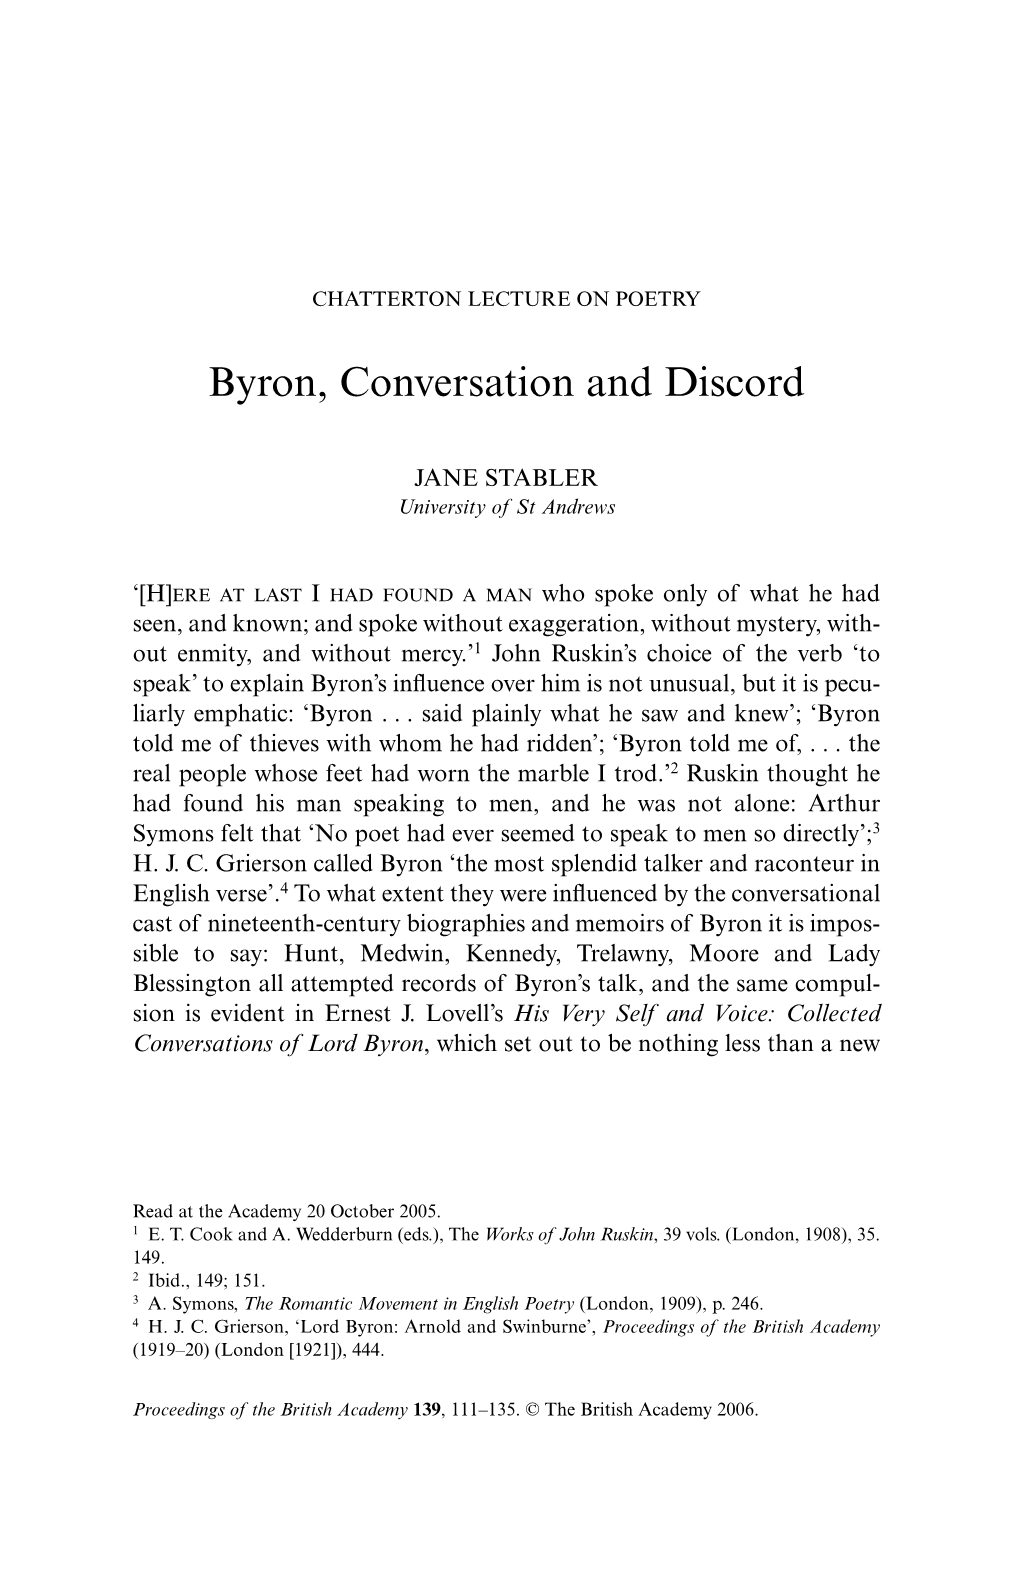 Byron, Conversation and Discord